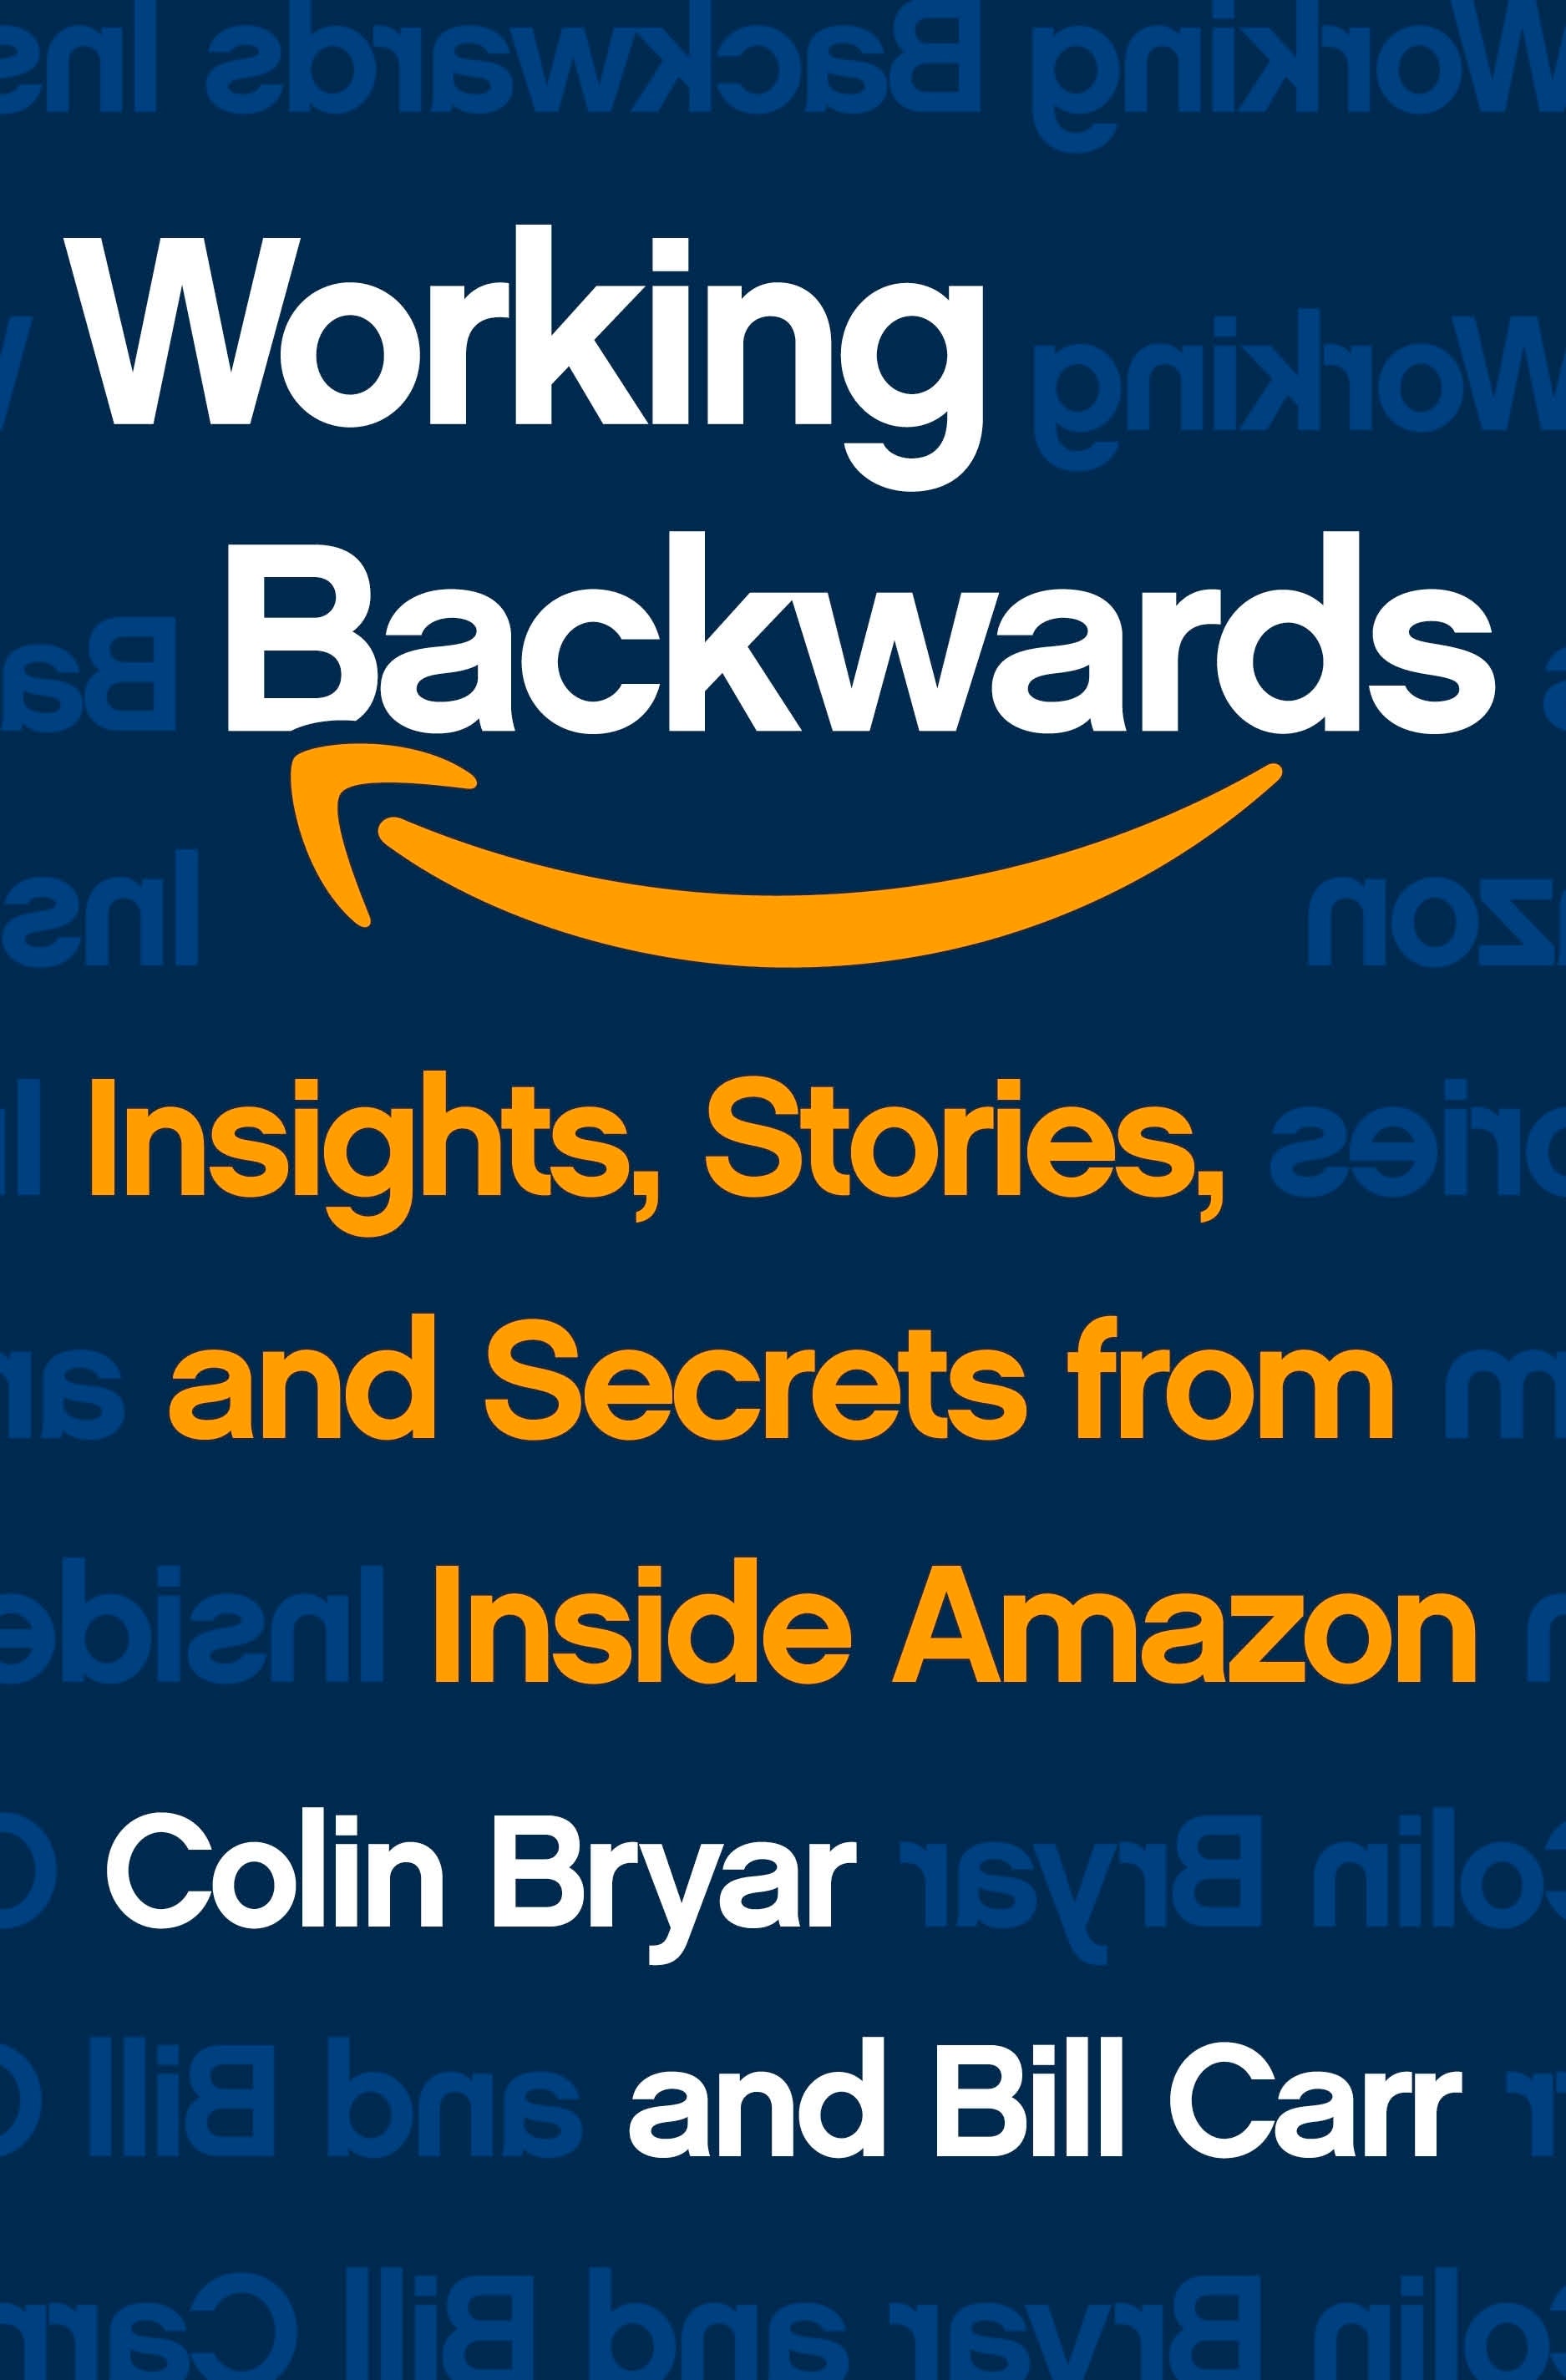 Book Review - Working Backwards